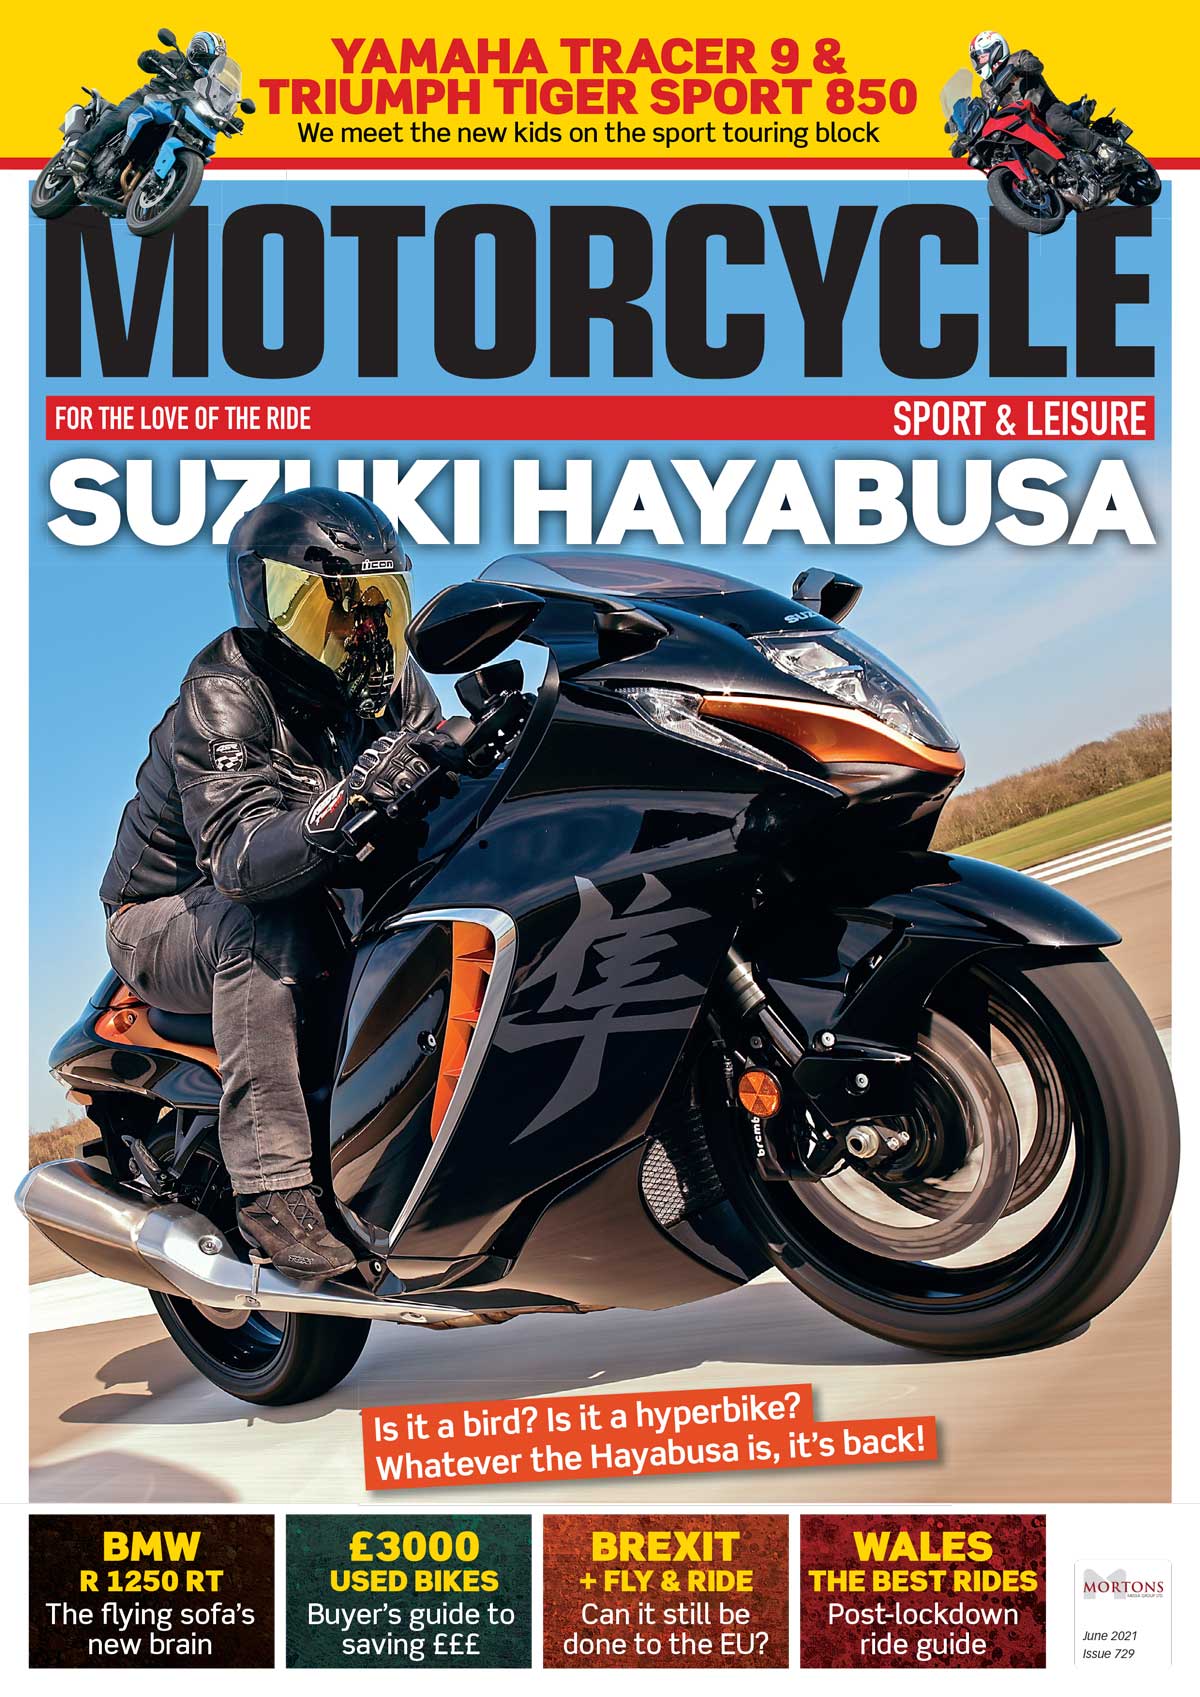 PREVIEW: June issue of Motorcycle Sport & Leisure